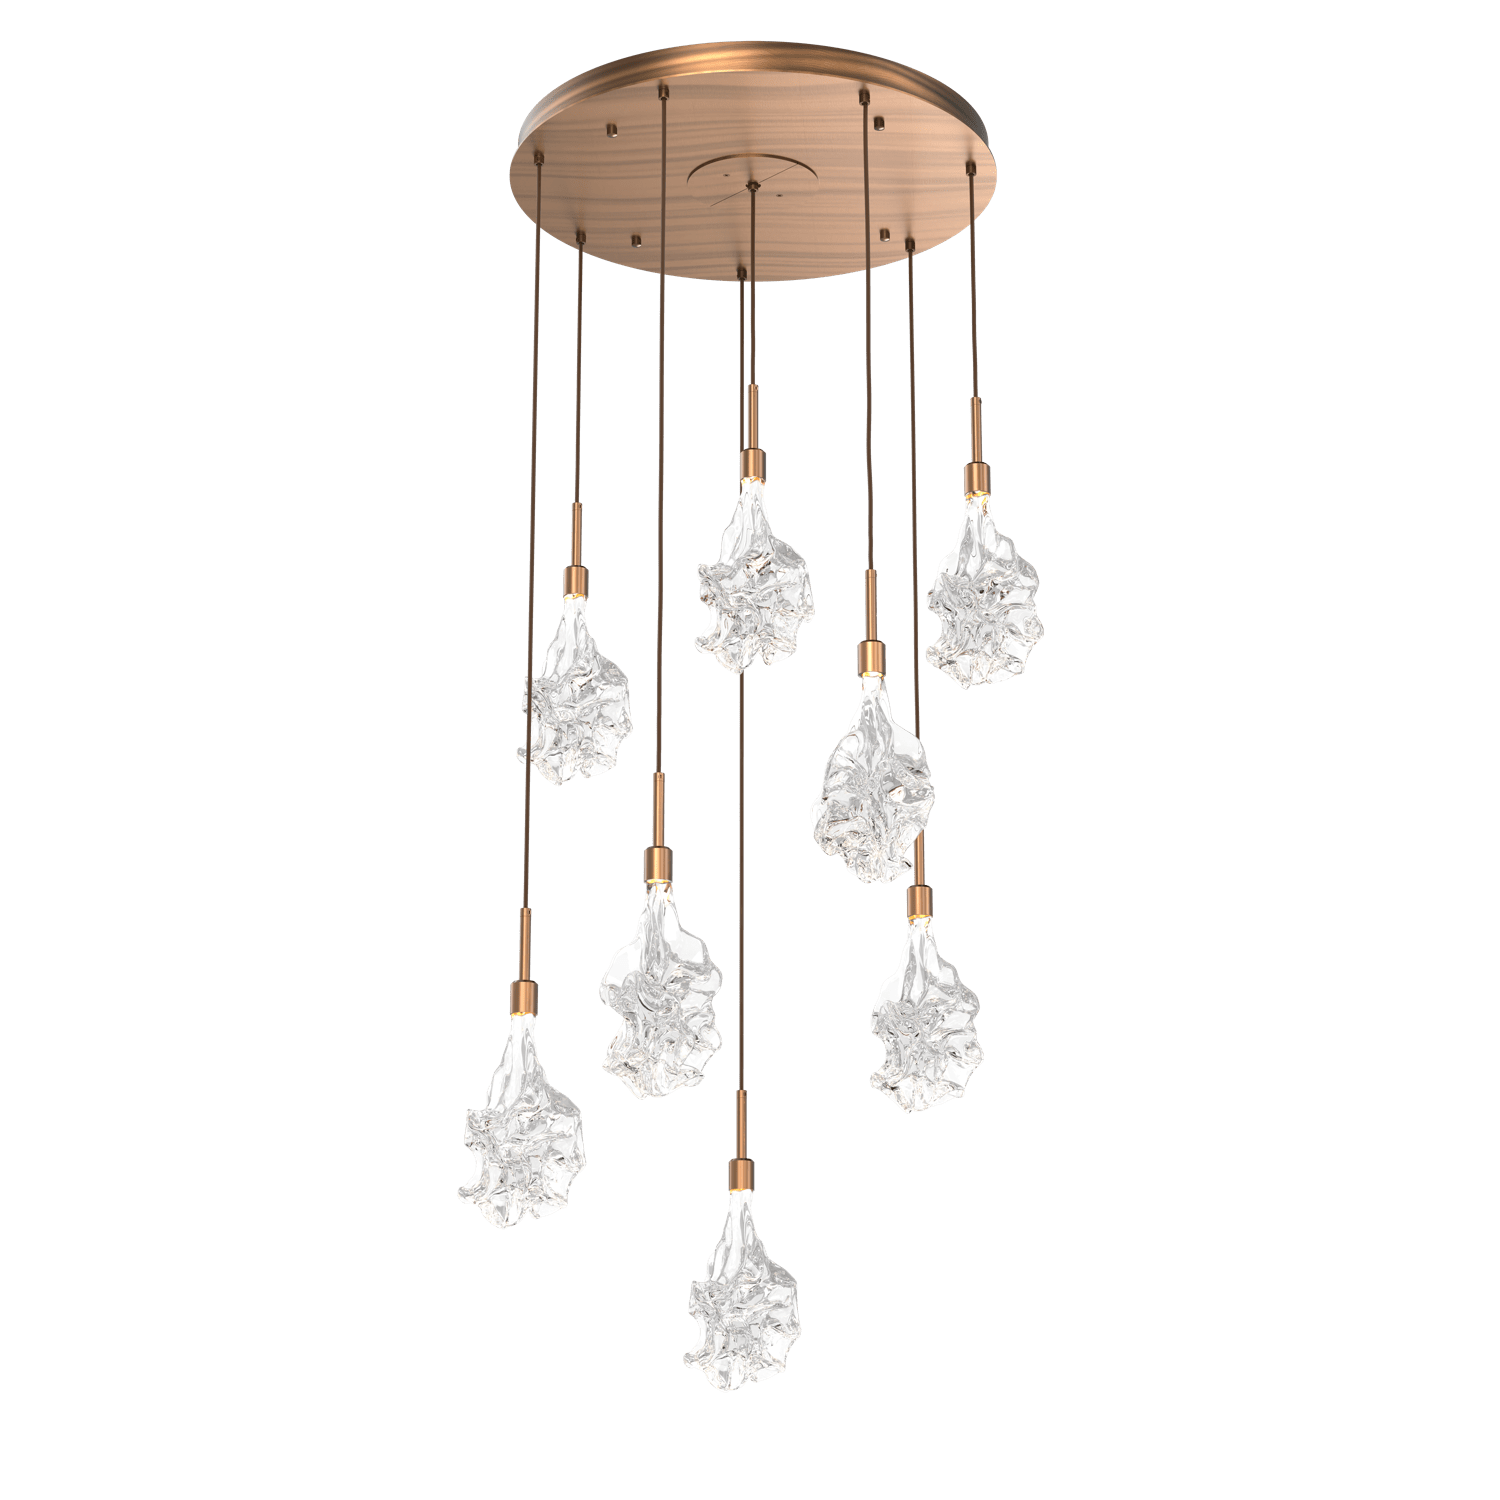 CHB0059-08-RB-Hammerton-Studio-Blossom-8-light-round-pendant-chandelier-with-oil-rubbed-bronze-finish-and-clear-handblown-crystal-glass-shades-and-LED-lamping